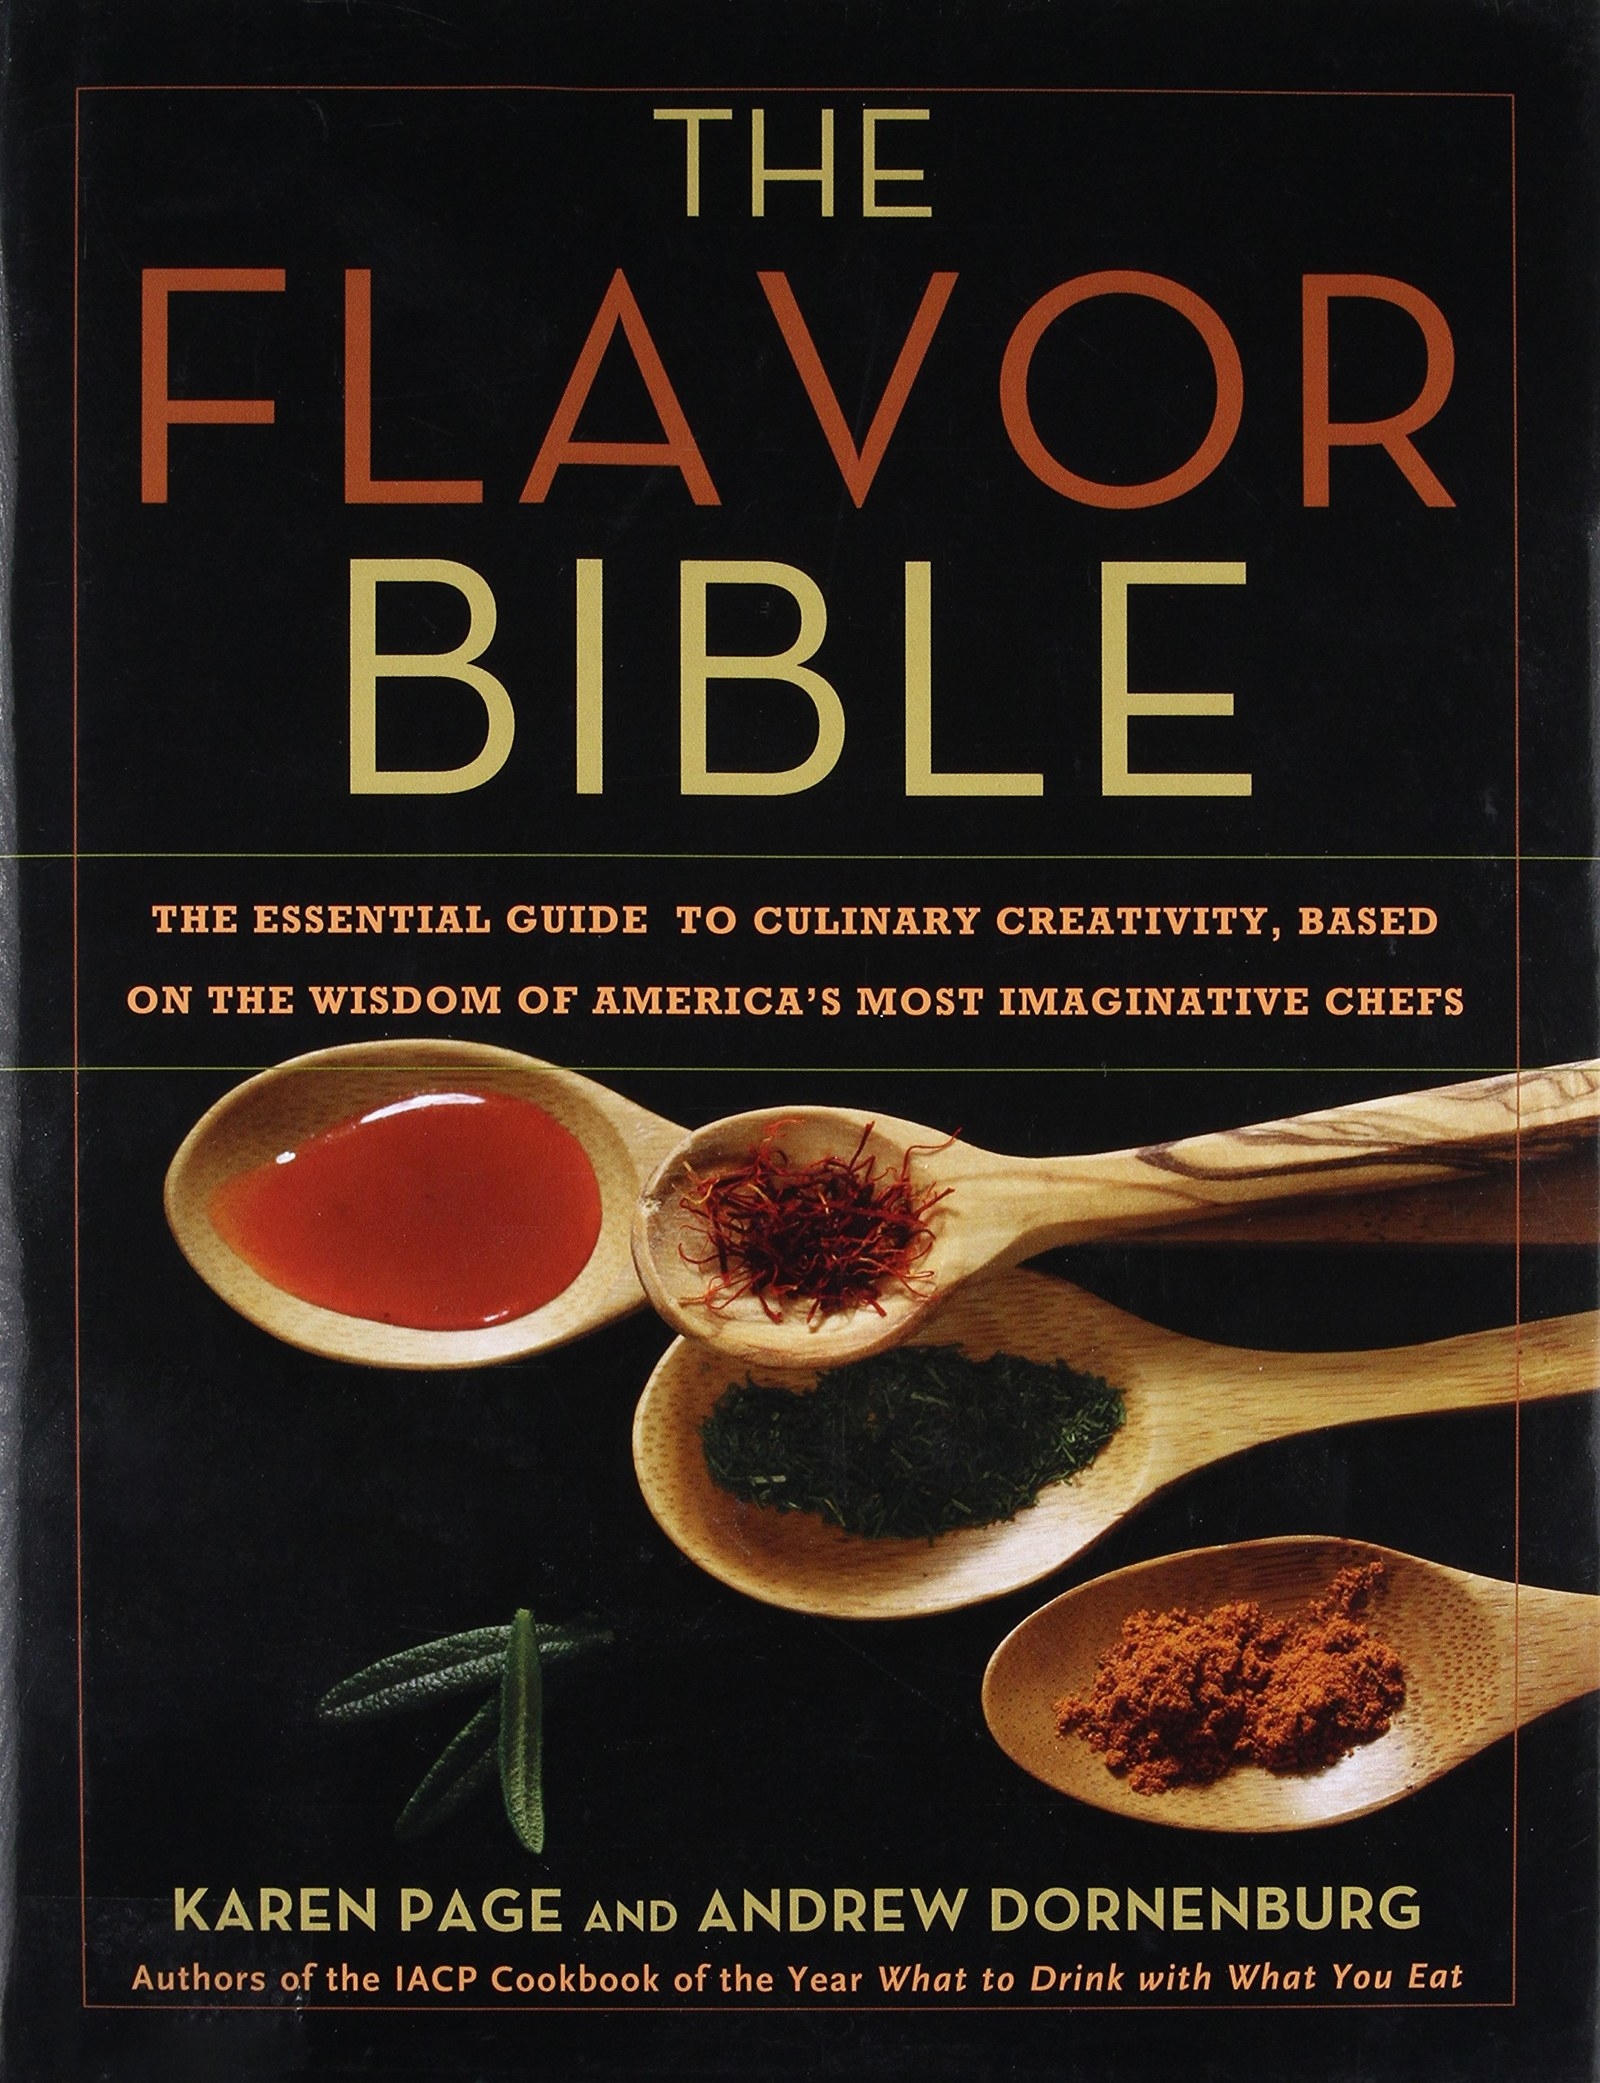 The cover of The Flavor Bible